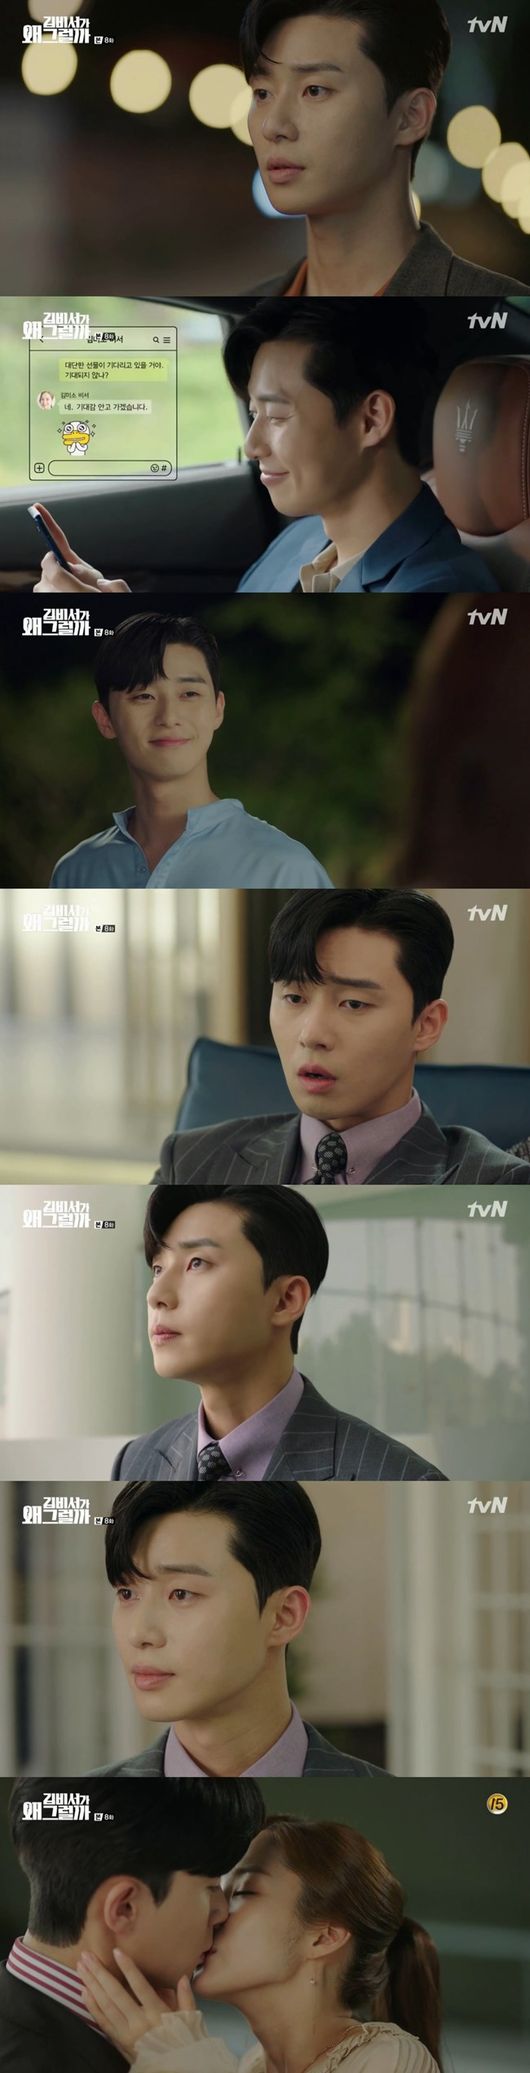 Why would Secretary Kim do that? Even if he is wicked and selfish, he is forced to fall for Park Seo-joon, Park Seo-joon, which is emitting infinite charm.In Youns Kitchen, he captivated viewers with his handsome appearance and friendly charm, and this time he became a vice chairman of perfectionism and became another charm appeal.Even Park Seo-joon, who is in narcissism, is full of charm.Cable channel tvN tree drama Why is Secretary Kim doing that? (playplayed by Baek Sun-woo, Choi Bo-rim, directed by Park Joon-hwa) became a new life work of Park Seo-joon.If the former entertainment Youns Kitchen and KBS 2TV Drama Ssam, My Way have raised the charm of Park Seo-joon to the fullest, Why is Kim Secretary? is peaking in Park Seo-joons charm.Park Seo-joon, who became a perfect man Lee Yeongjun with handsome, smart, and excellent management skills, was properly dressed for my clothes.It is Park Seo-joon who is completely digesting the character and attracting viewers.In addition to stable acting ability, he made the character perfectly his own and completed the Lee Yeongjun=Park Seo-joon itself.Park Seo-joon is not only Lee Yeongjuns harsh side, but also a romantic charm to and from narcissists and lovers.Park Seo-joon added a unique charm to the Lee Yeongjun character more colorfully.In addition, Lee Yeongjuns opponent, Kim Mi-so, is a hot-buttoned Park Min-young, reminiscent of the actual couple.Park Seo-joon and Park Min-young are breathing for the first time through this work. They are recognized as a perfect chemie for viewers by giving romance and laughing with comic episodes.As this work becomes a place of full-scale charm of Park Seo-joon, it is inevitable that the episode after the start of love between Lee Yeongjun and Kim Mi-so will be more anticipated.In the 8th broadcast on the 28th, Kim Mi-so confessed to Lee Yeongjun, I like it, and the two became couples.Lee Yeongjuns heart, which has been actively appealing to charm, has been through.Park Seo-joons appeal to be completed more beautifully after the start of romance with Park Min-young is expected, as the reaction of viewers who have already fallen into Park Seo-joon Holic has been hot since the beginning of broadcasting.TVN broadcast screen capture